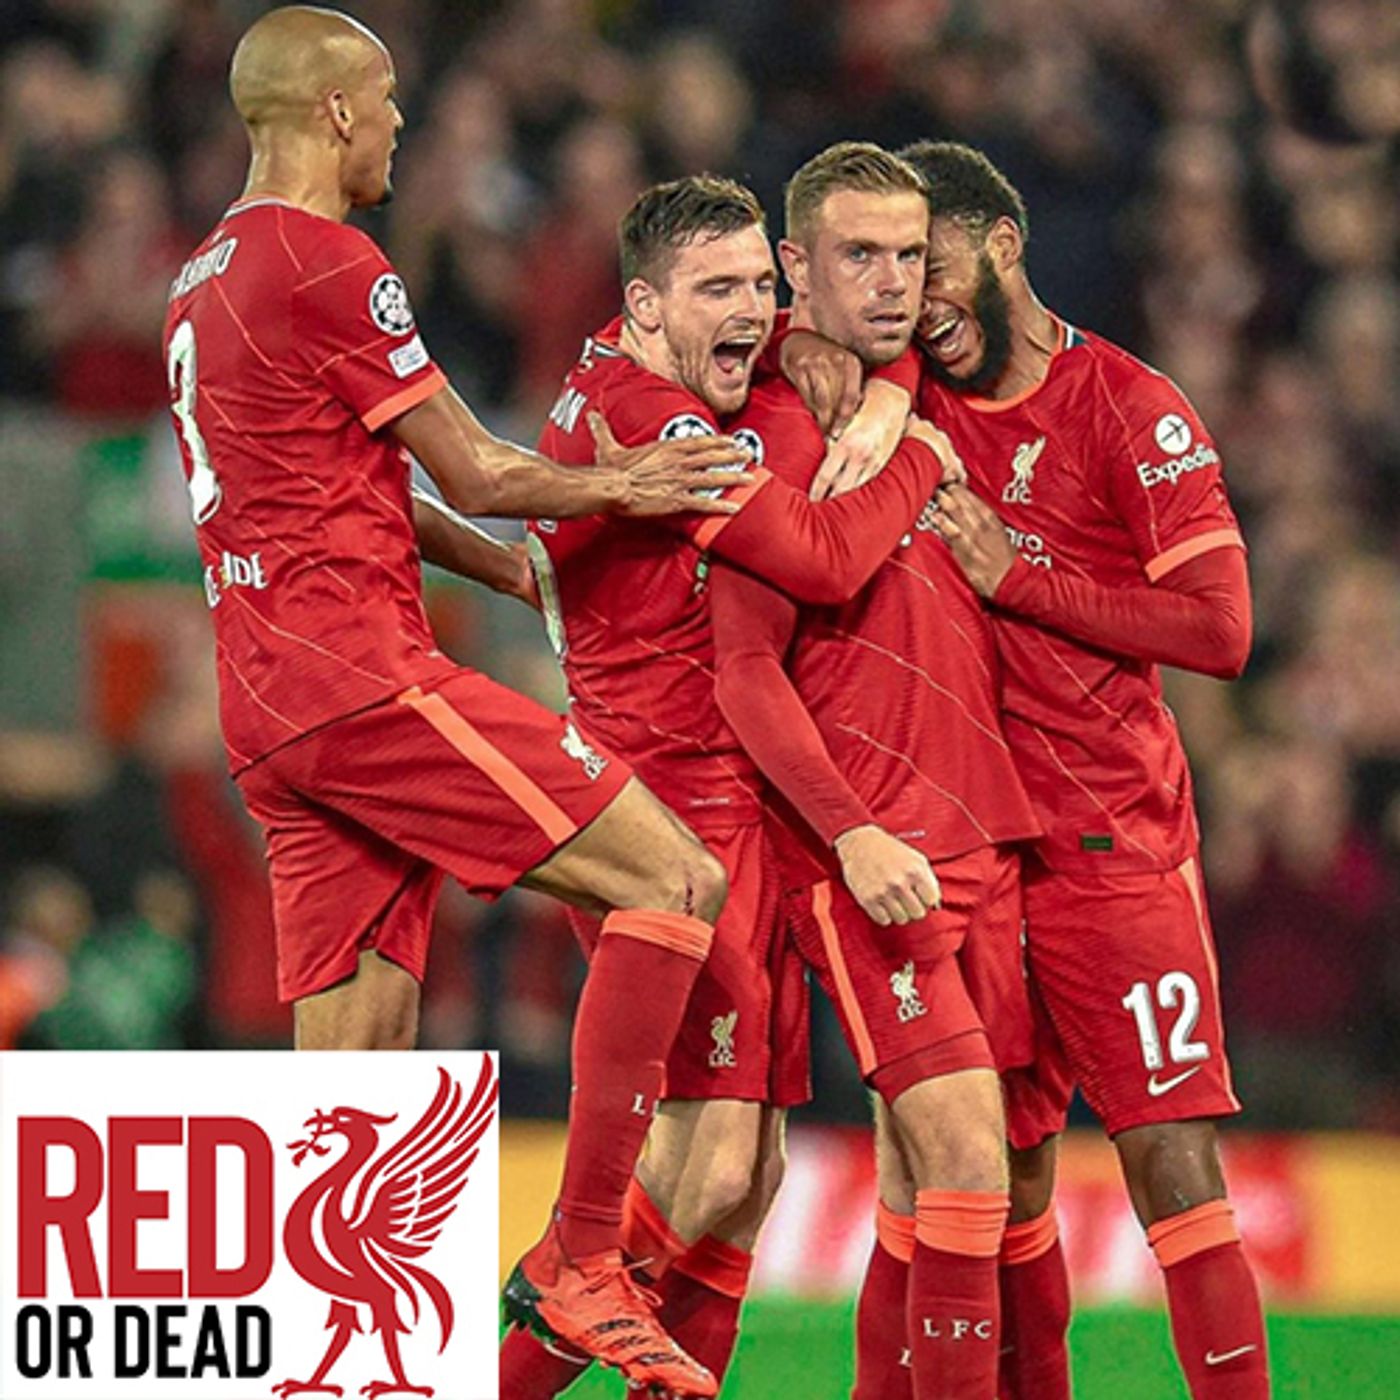 S1 Ep45: The Red Or Dead Podcast - Episode 45